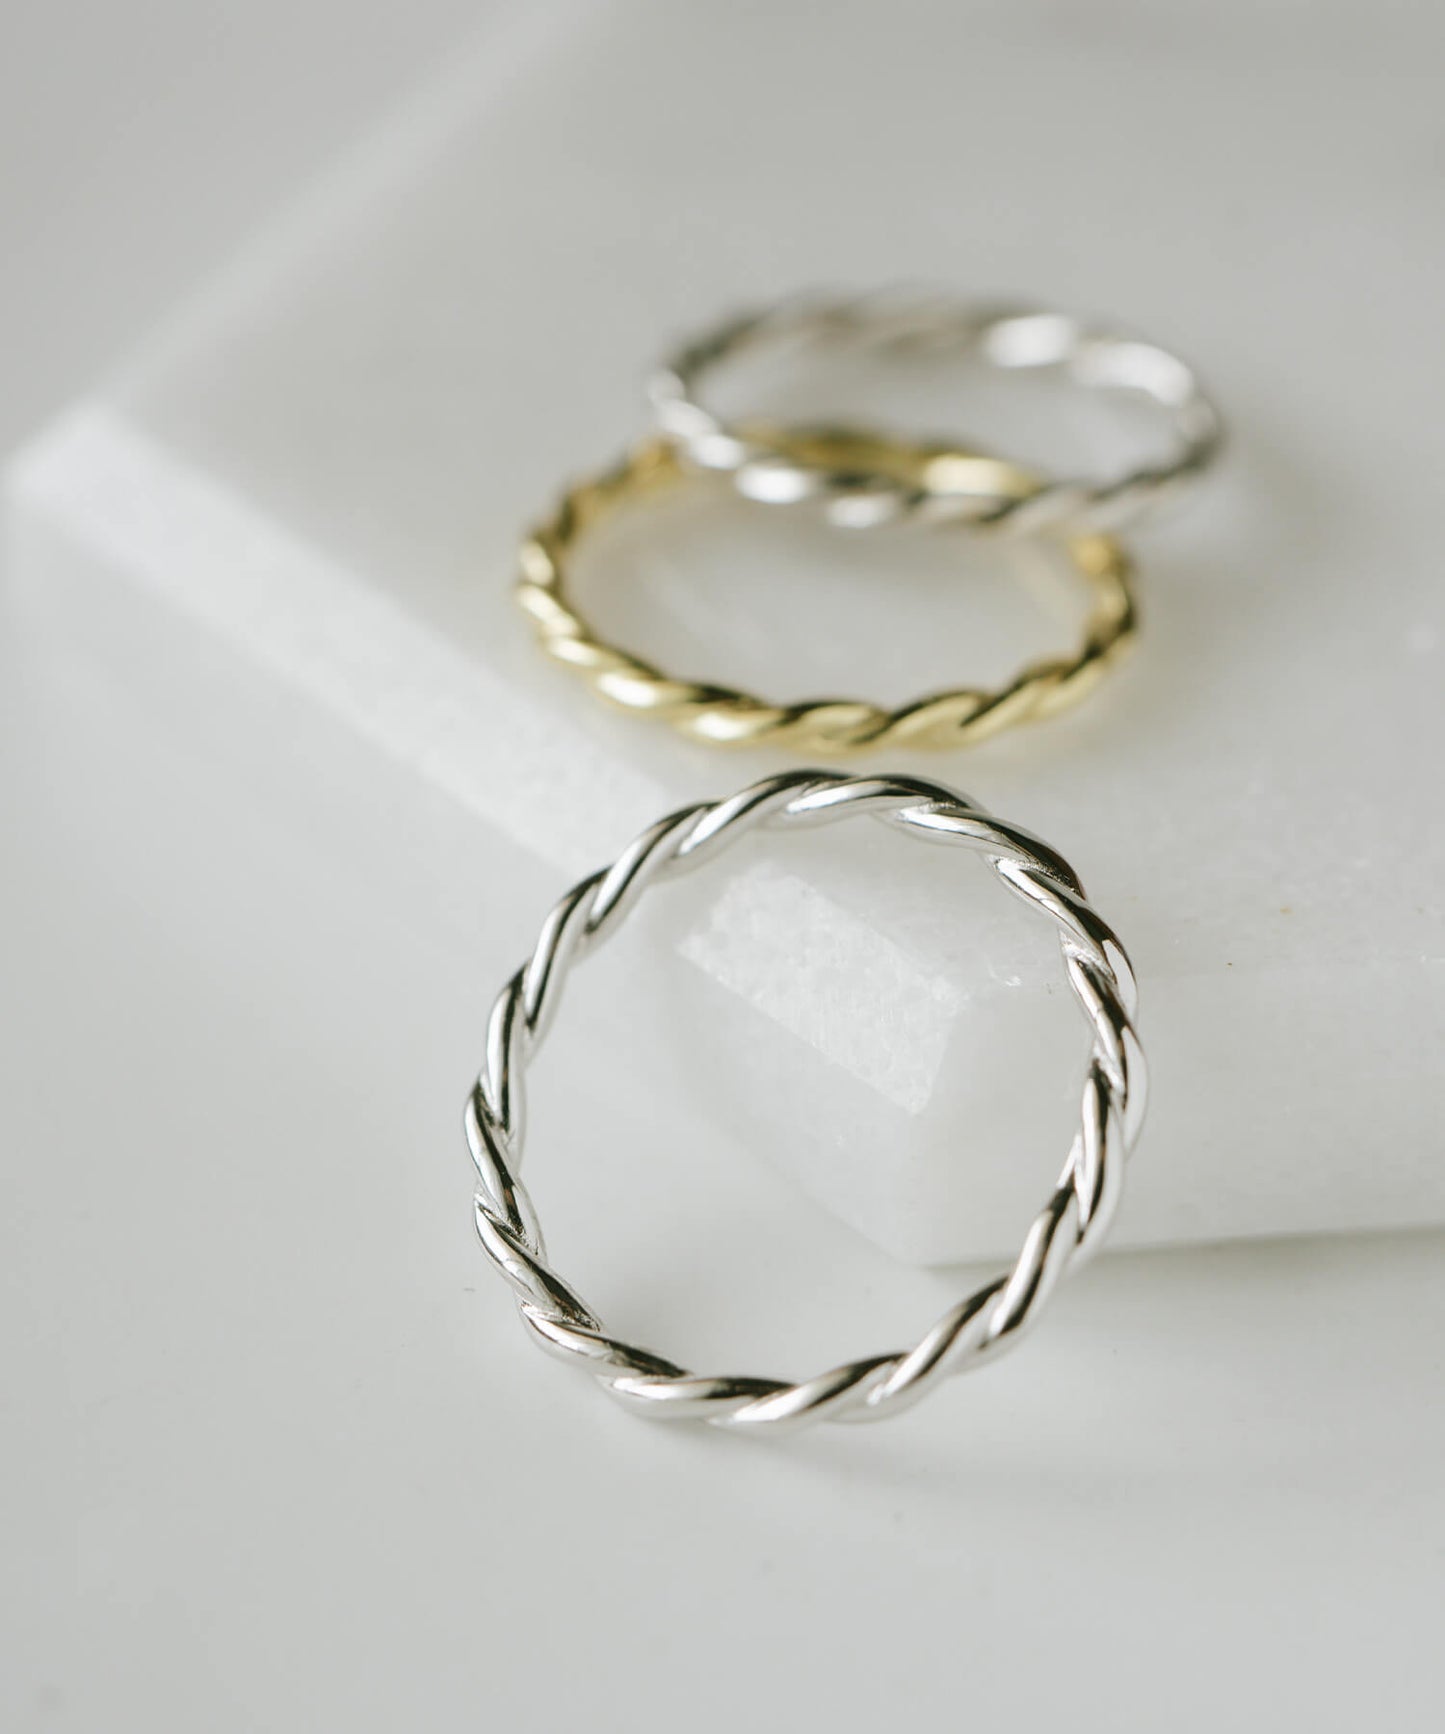 Silver925 twisted rope ring | KIERRE RING